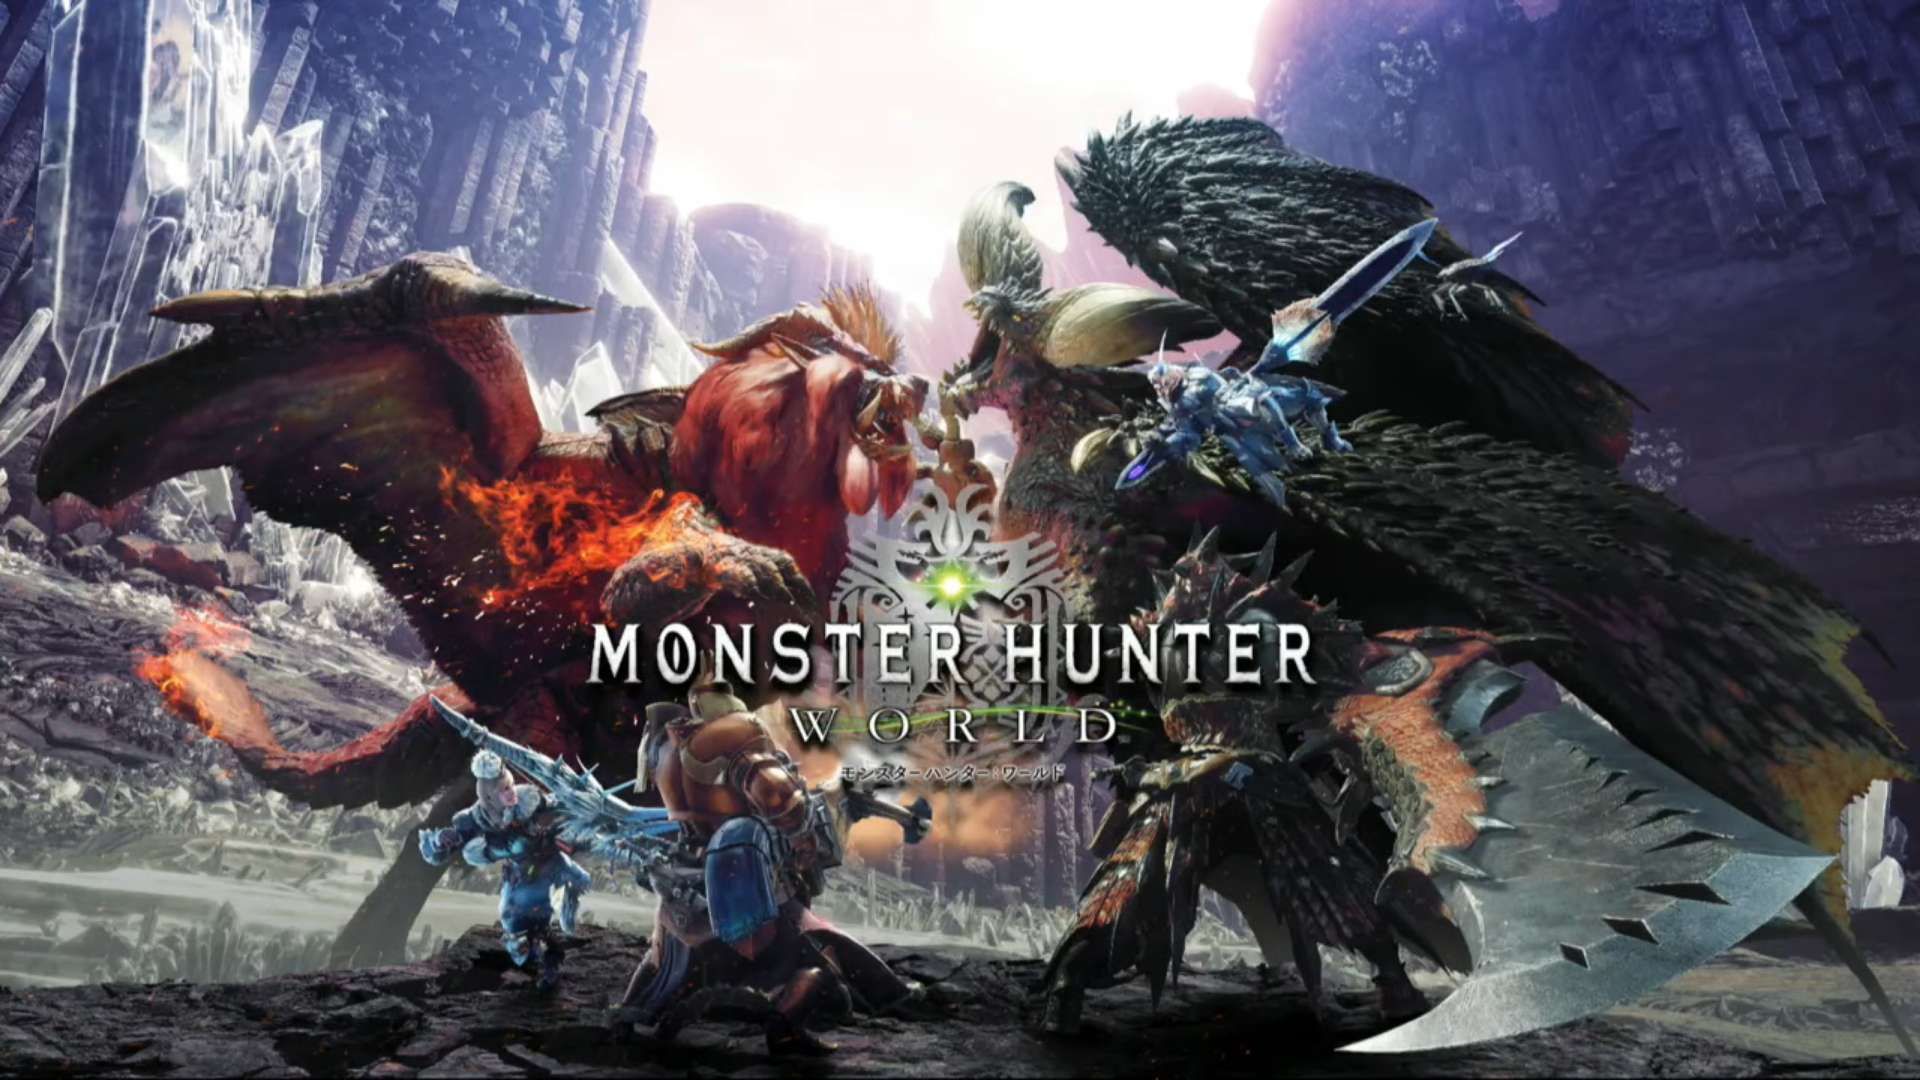 Latest Monster Hunter World Pc Patch Adds New Mouse Control Schemes Changes Location Of Event Quest Relish The Moment Gameranx